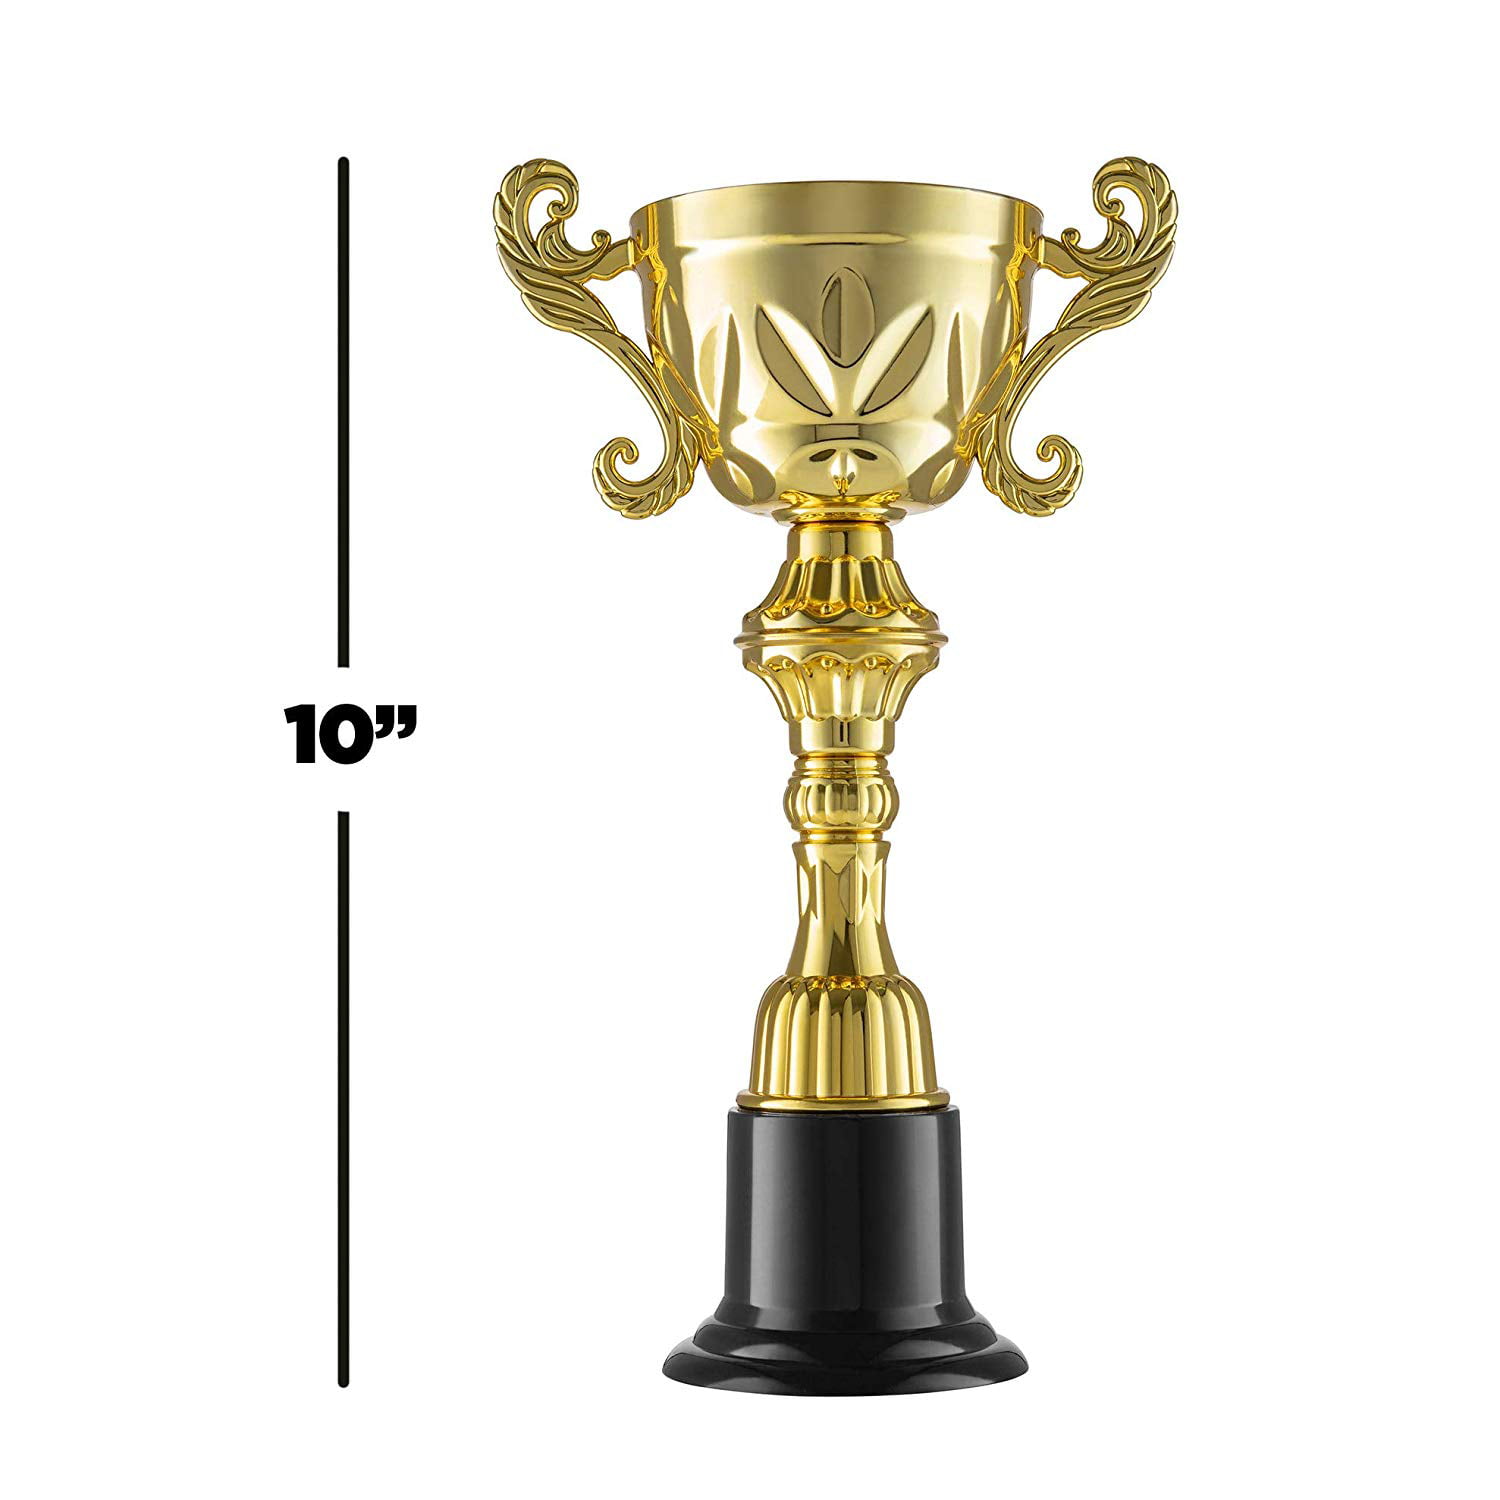 Surge Gold Cup Presentation Award Trophy  11.25 Inch Free p&p & Engraving 